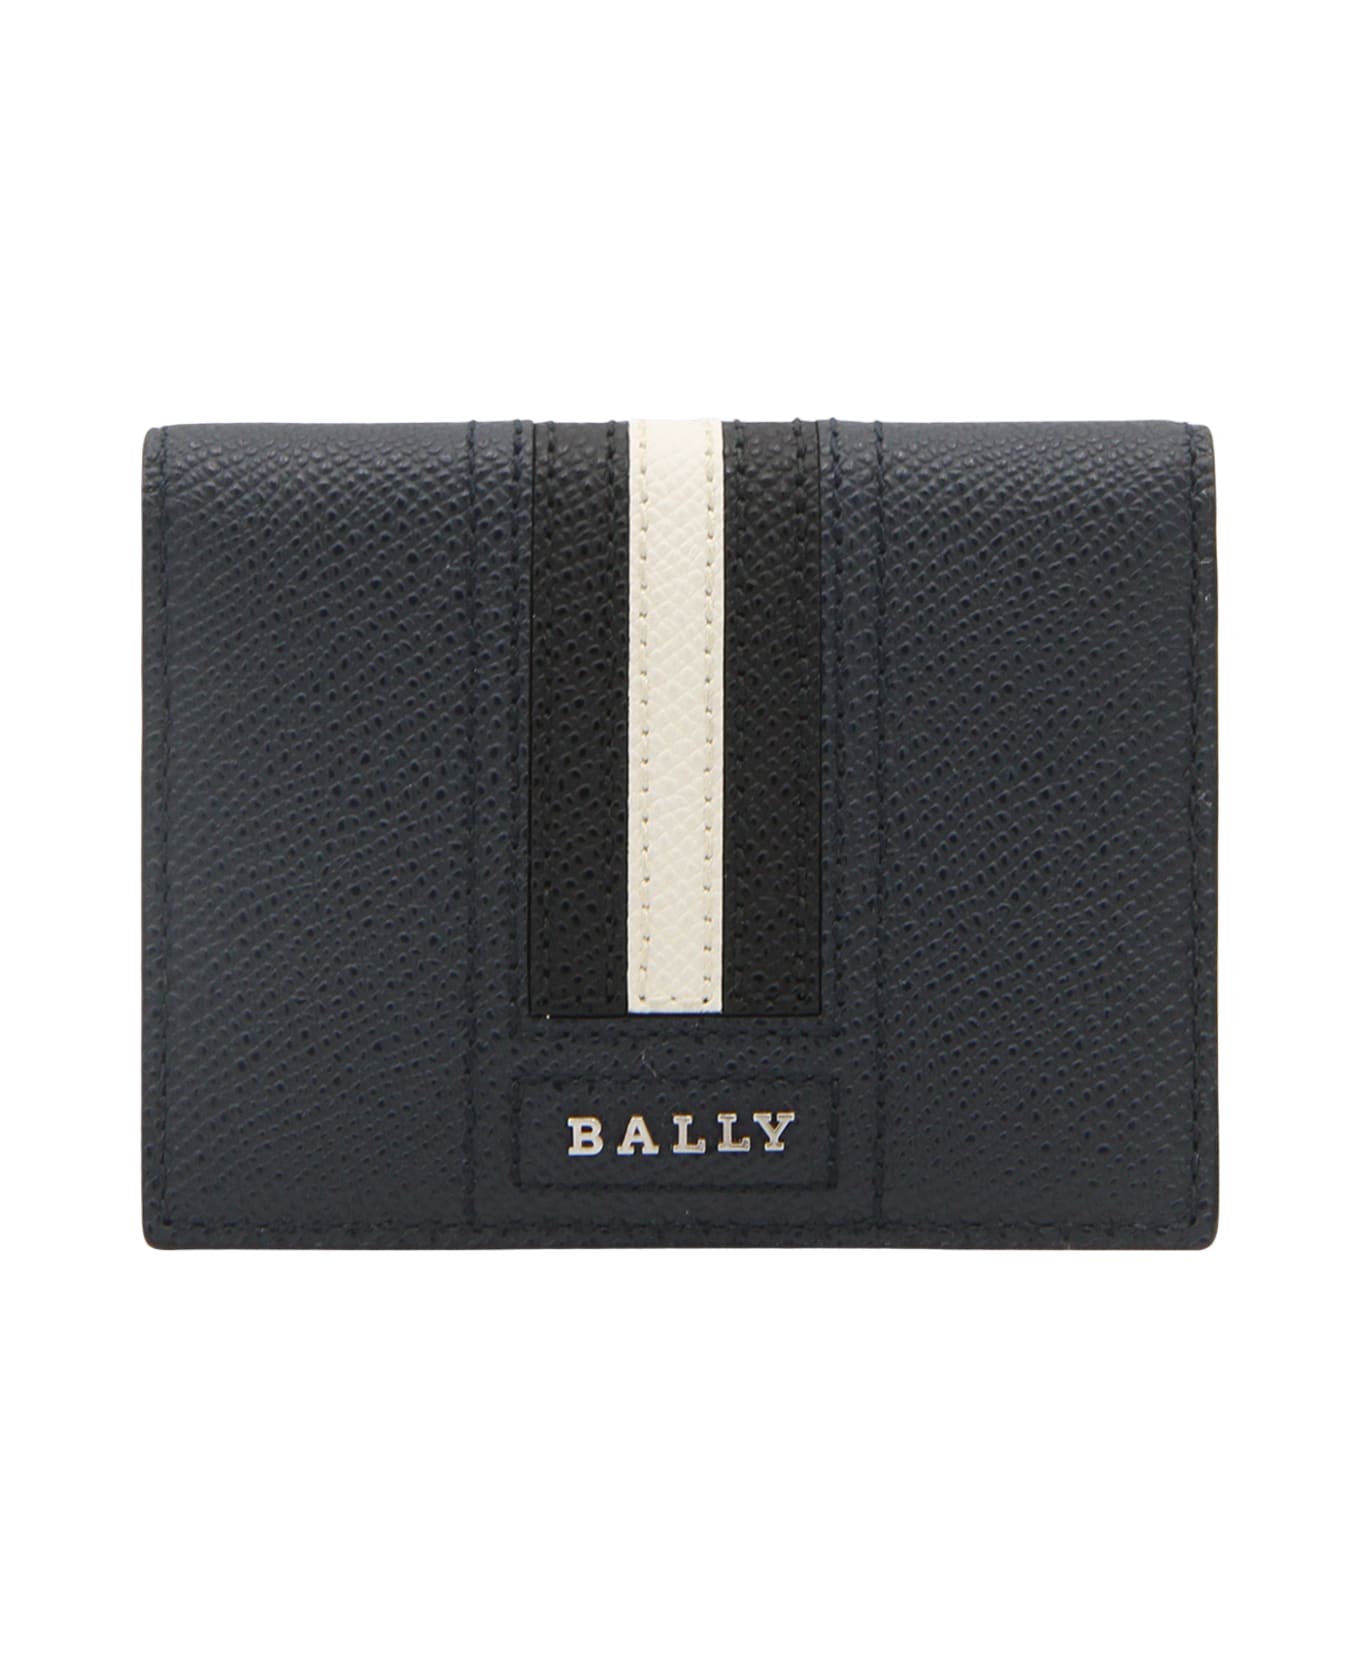 Bally Navy Blue, White And Black Leather Wallet - NEW BLUE